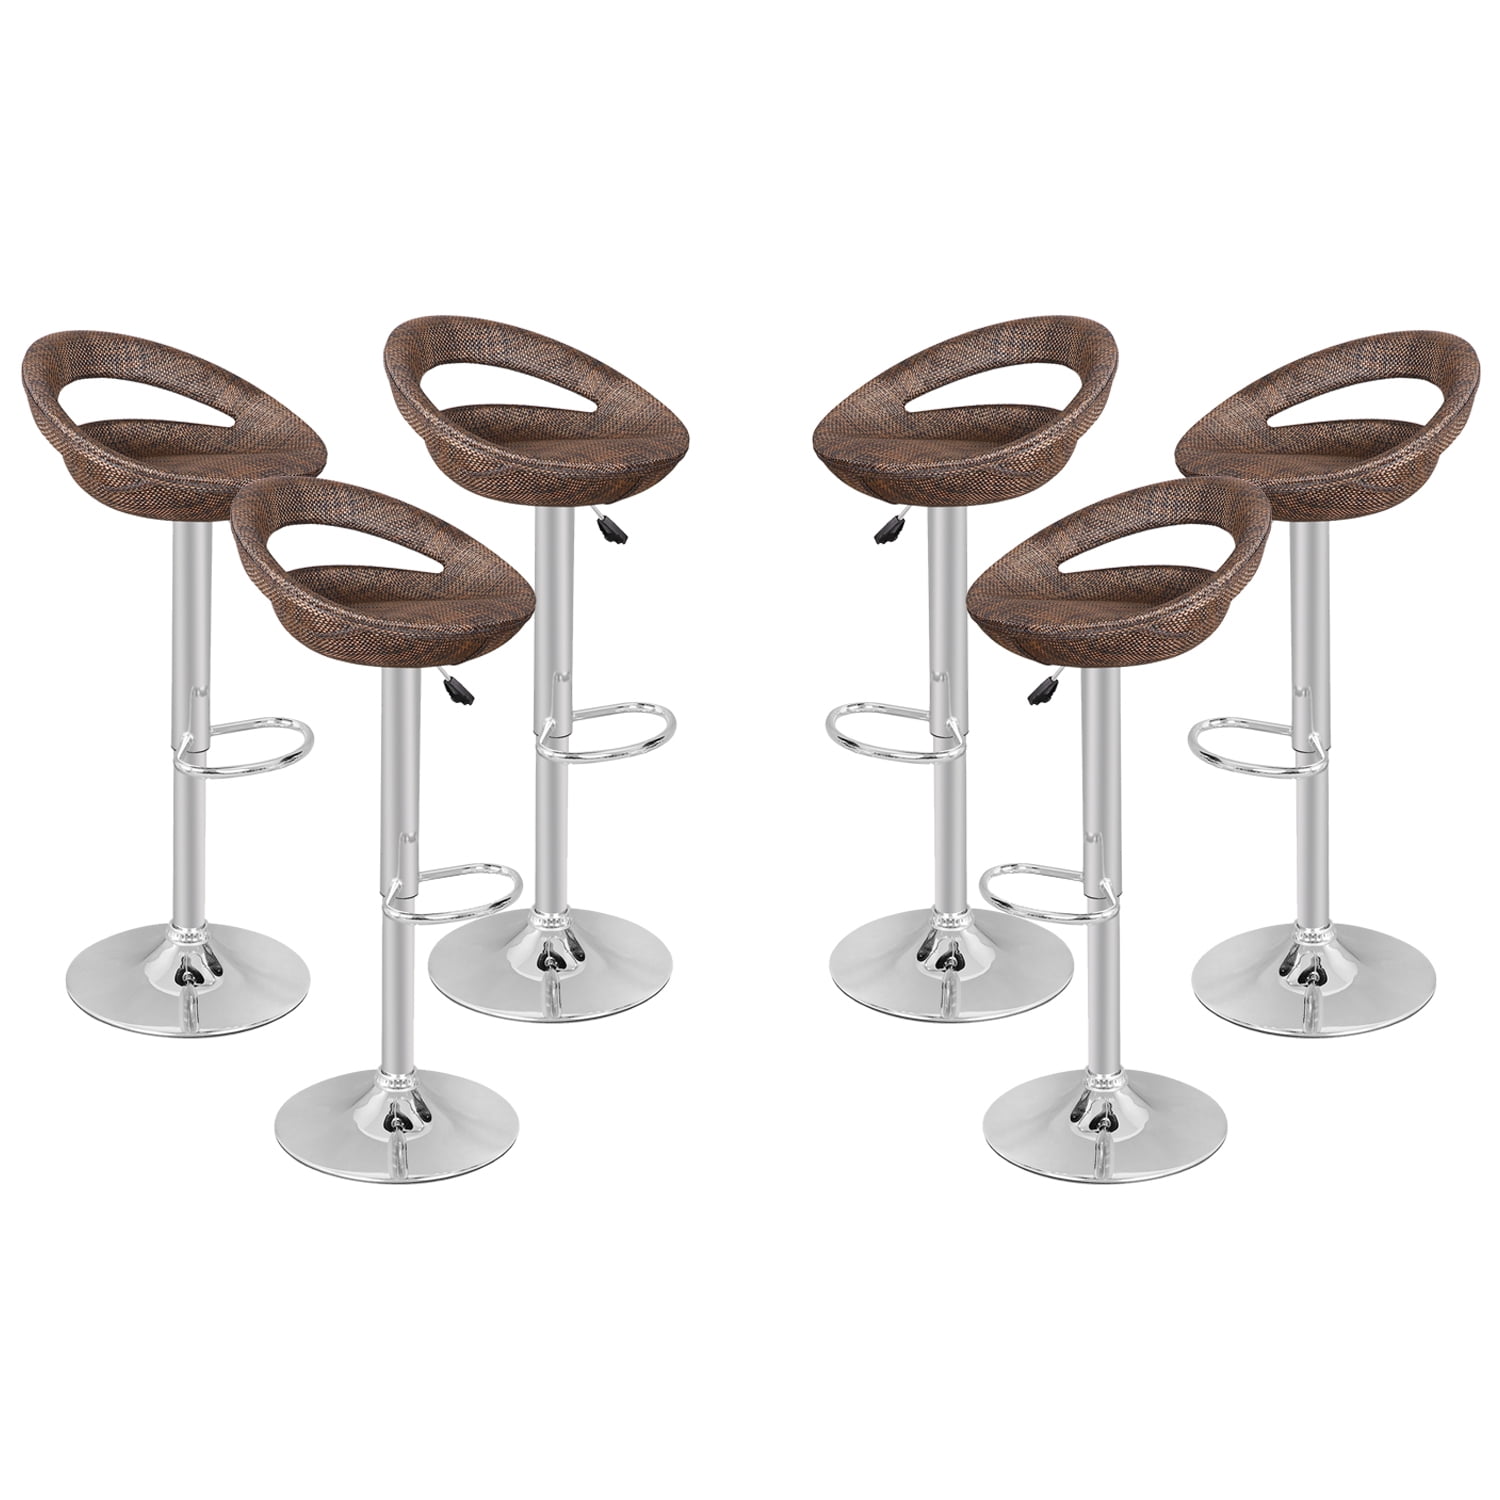 34 Inch Stools Off 67, 34 Inch Outdoor Bar Stools